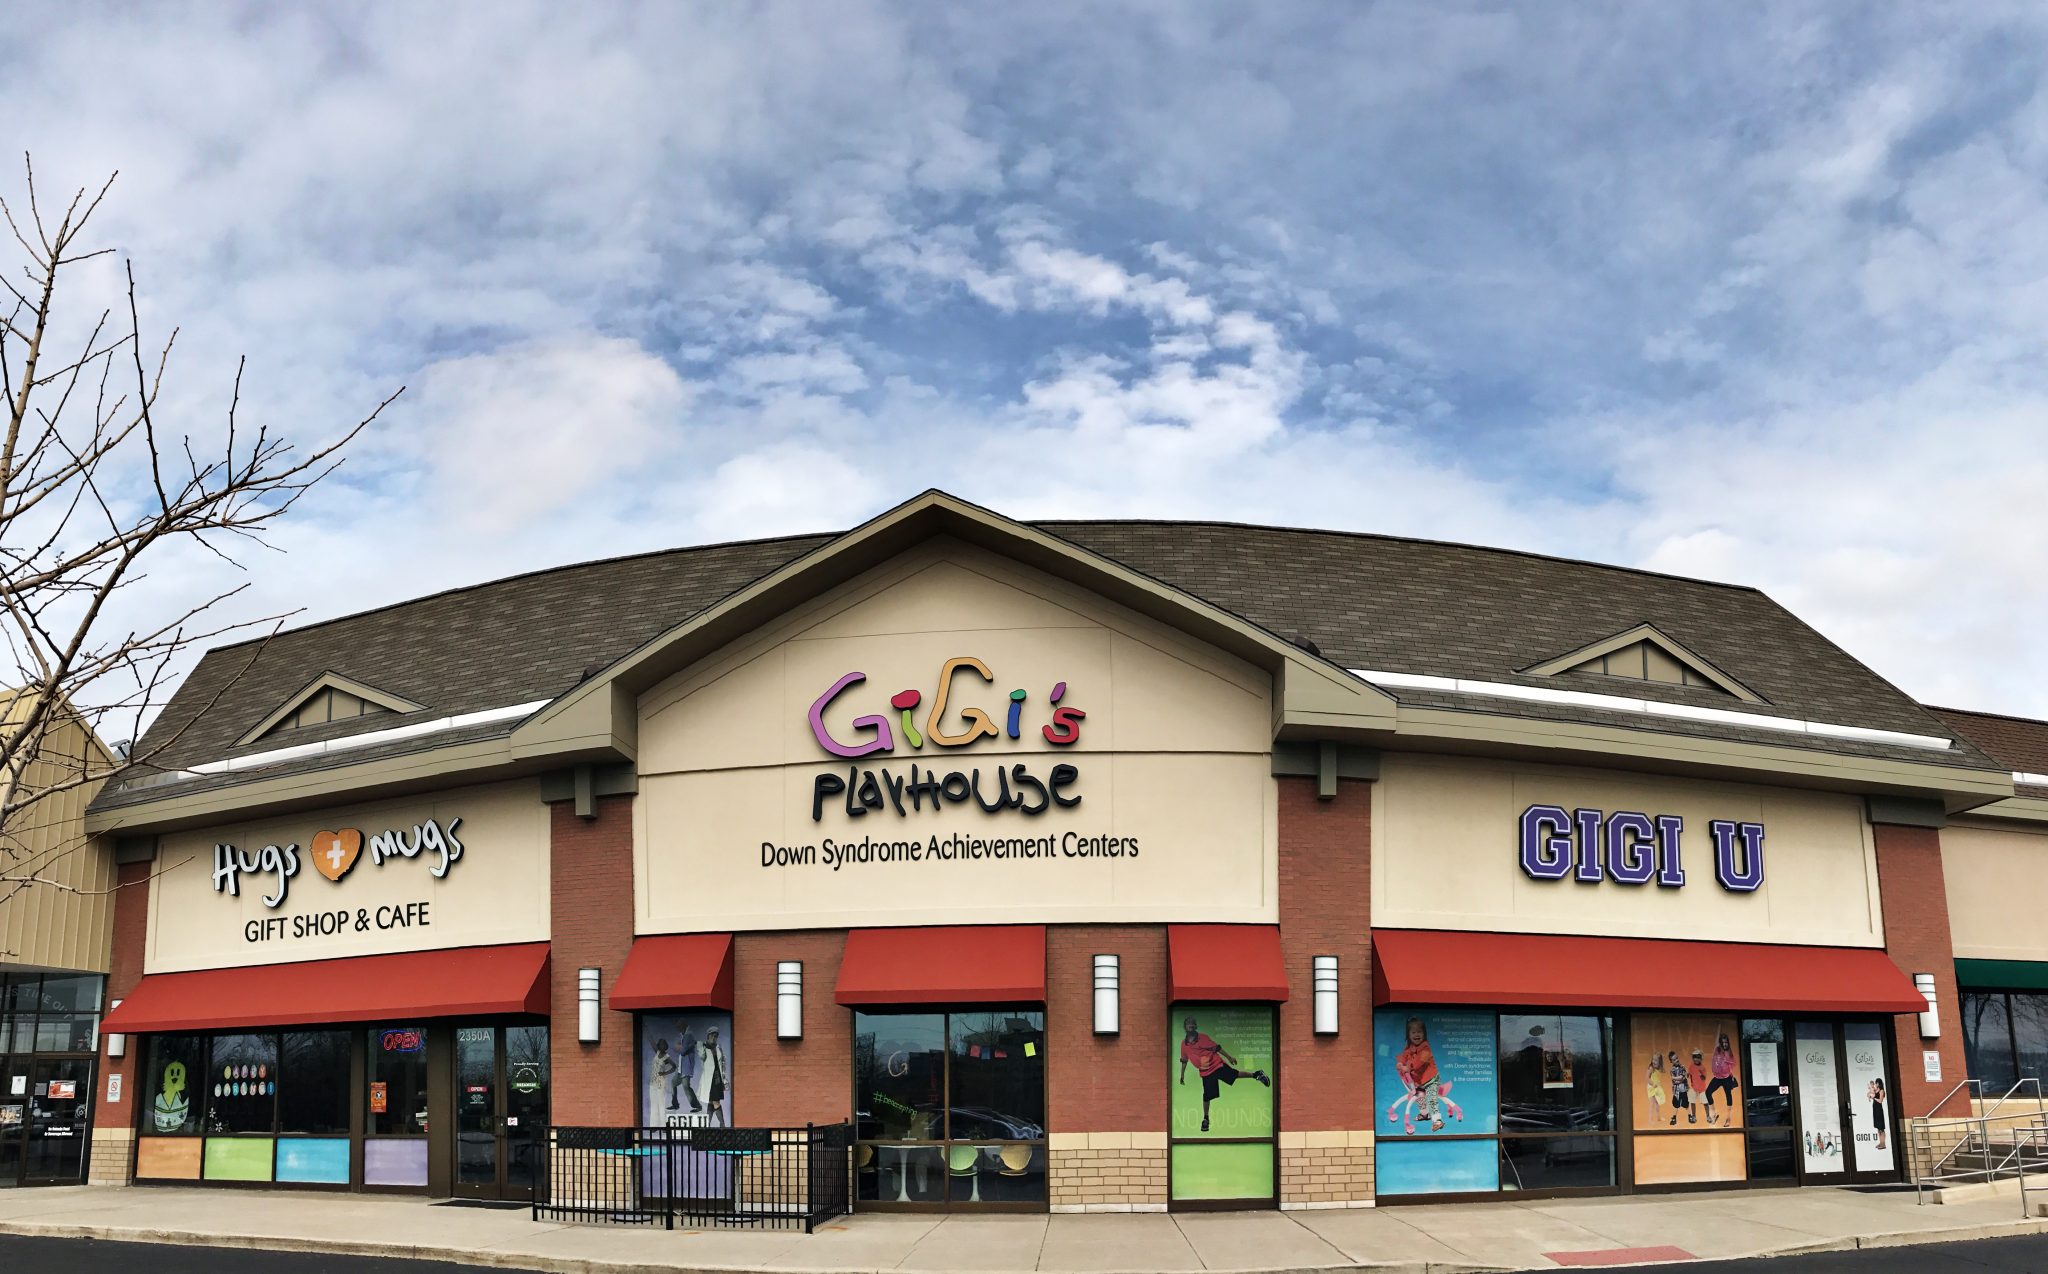 GIGI'S PLAYHOUSE- The True Definition Of Innovation Can Be Found At GiGi’s Playhouse